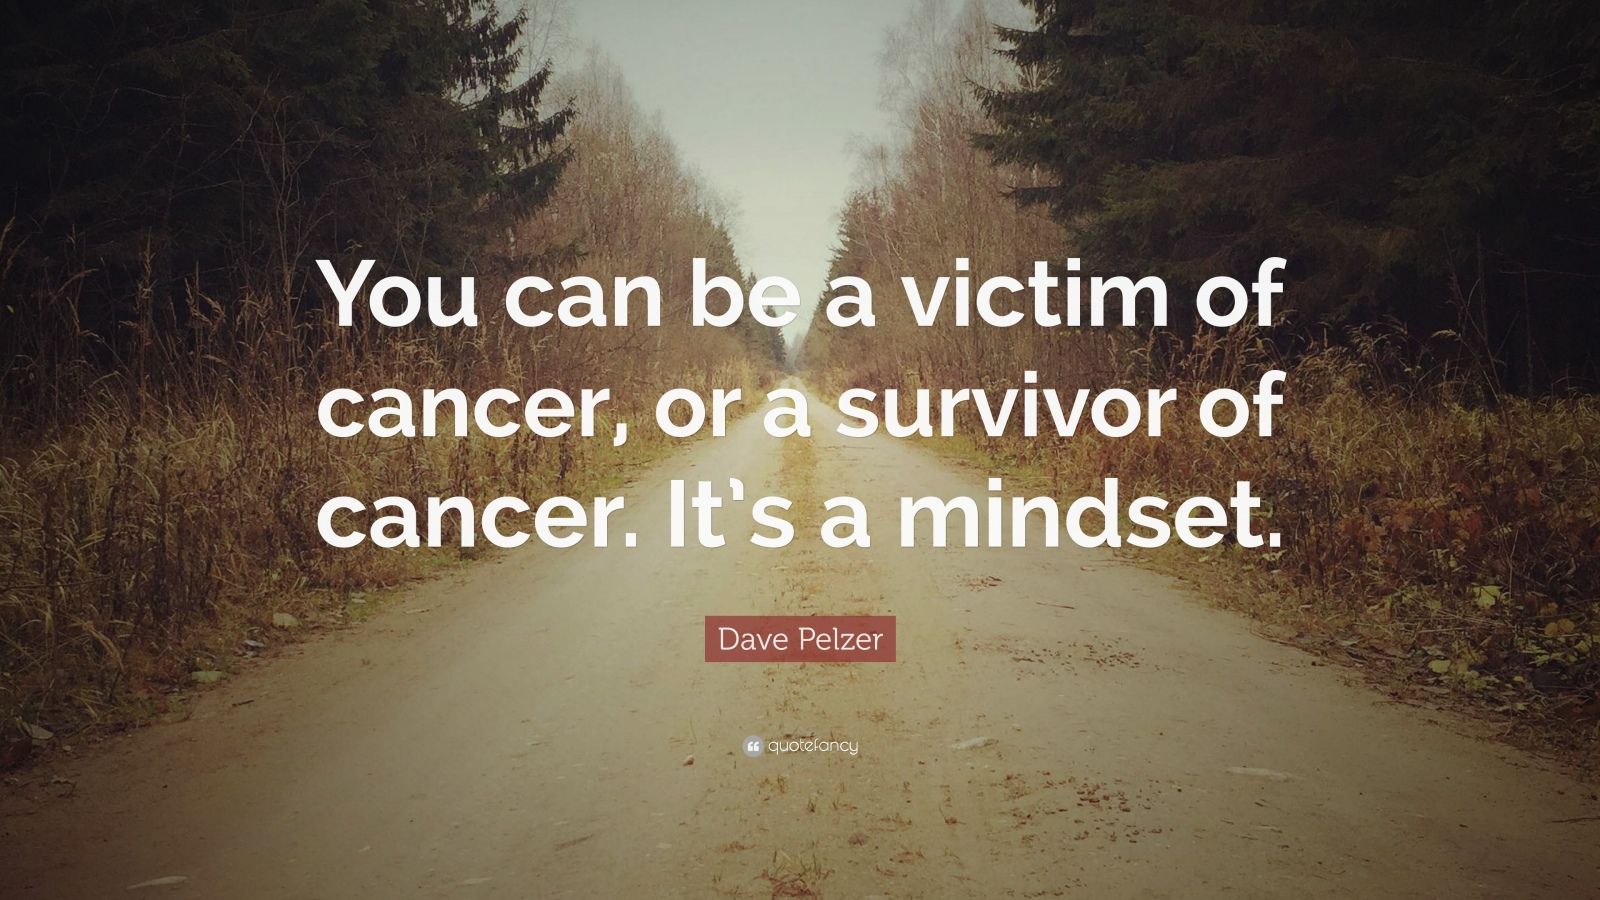 Dave Pelzer Quote: “You can be a victim of cancer, or a survivor of